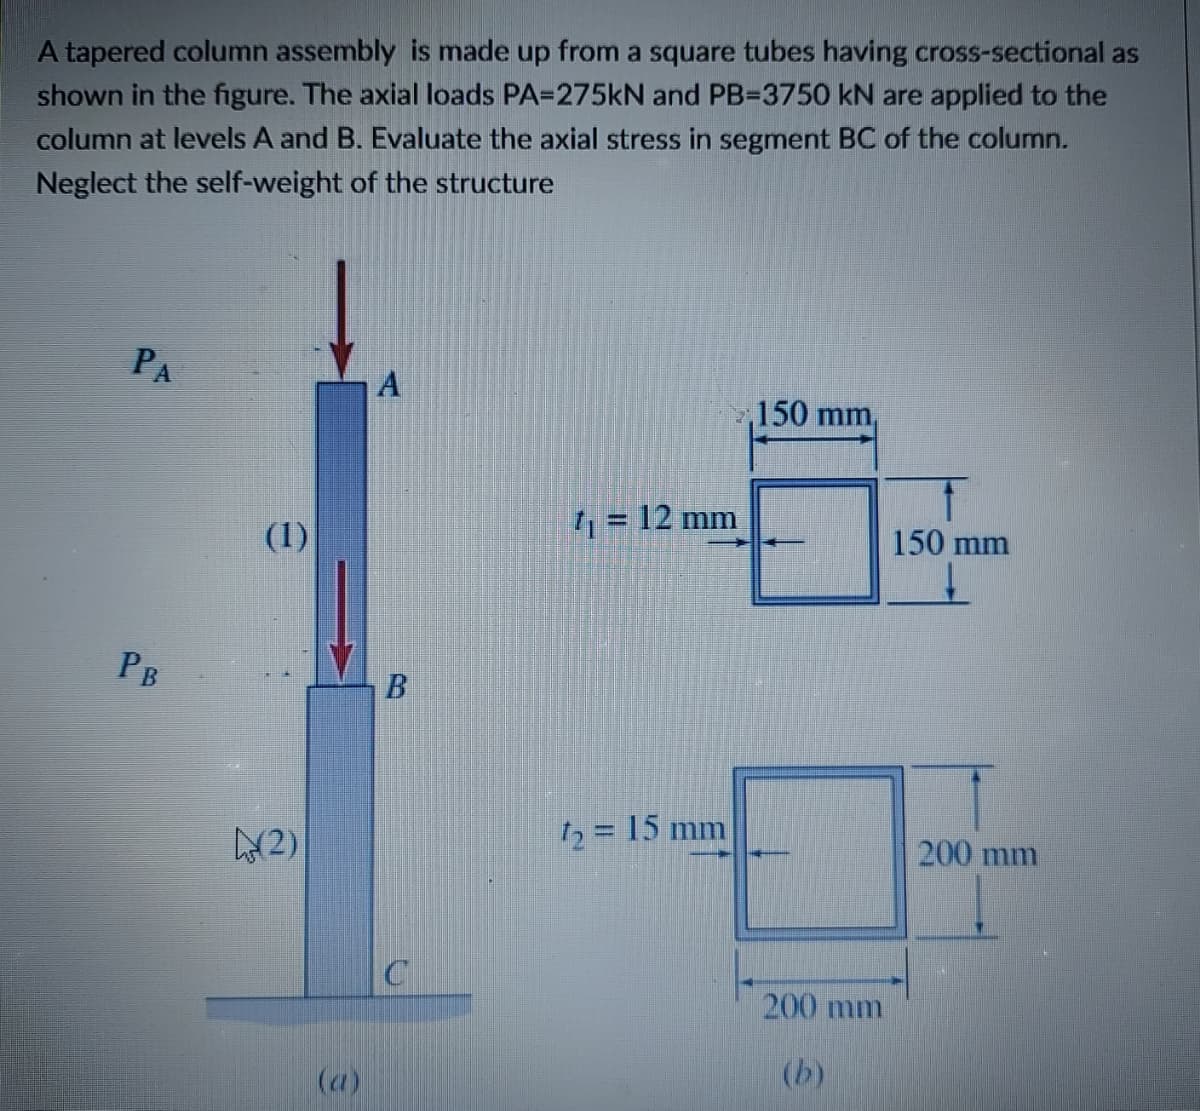 A tapered column assembly is made up from a square tubes having cross-sectional as
shown in the figure. The axial loads PA=275KN and PB-3750 kN are applied to the
column at levels A and B. Evaluate the axial stress in segment BC of the column.
Neglect the self-weight of the structure
PA
A
150 mm,
= 12 mm
(1)
150 mm
PB
12 = 15 mm
%3D
(2)
200 mm
200 mm
(b)
(a)
B.
